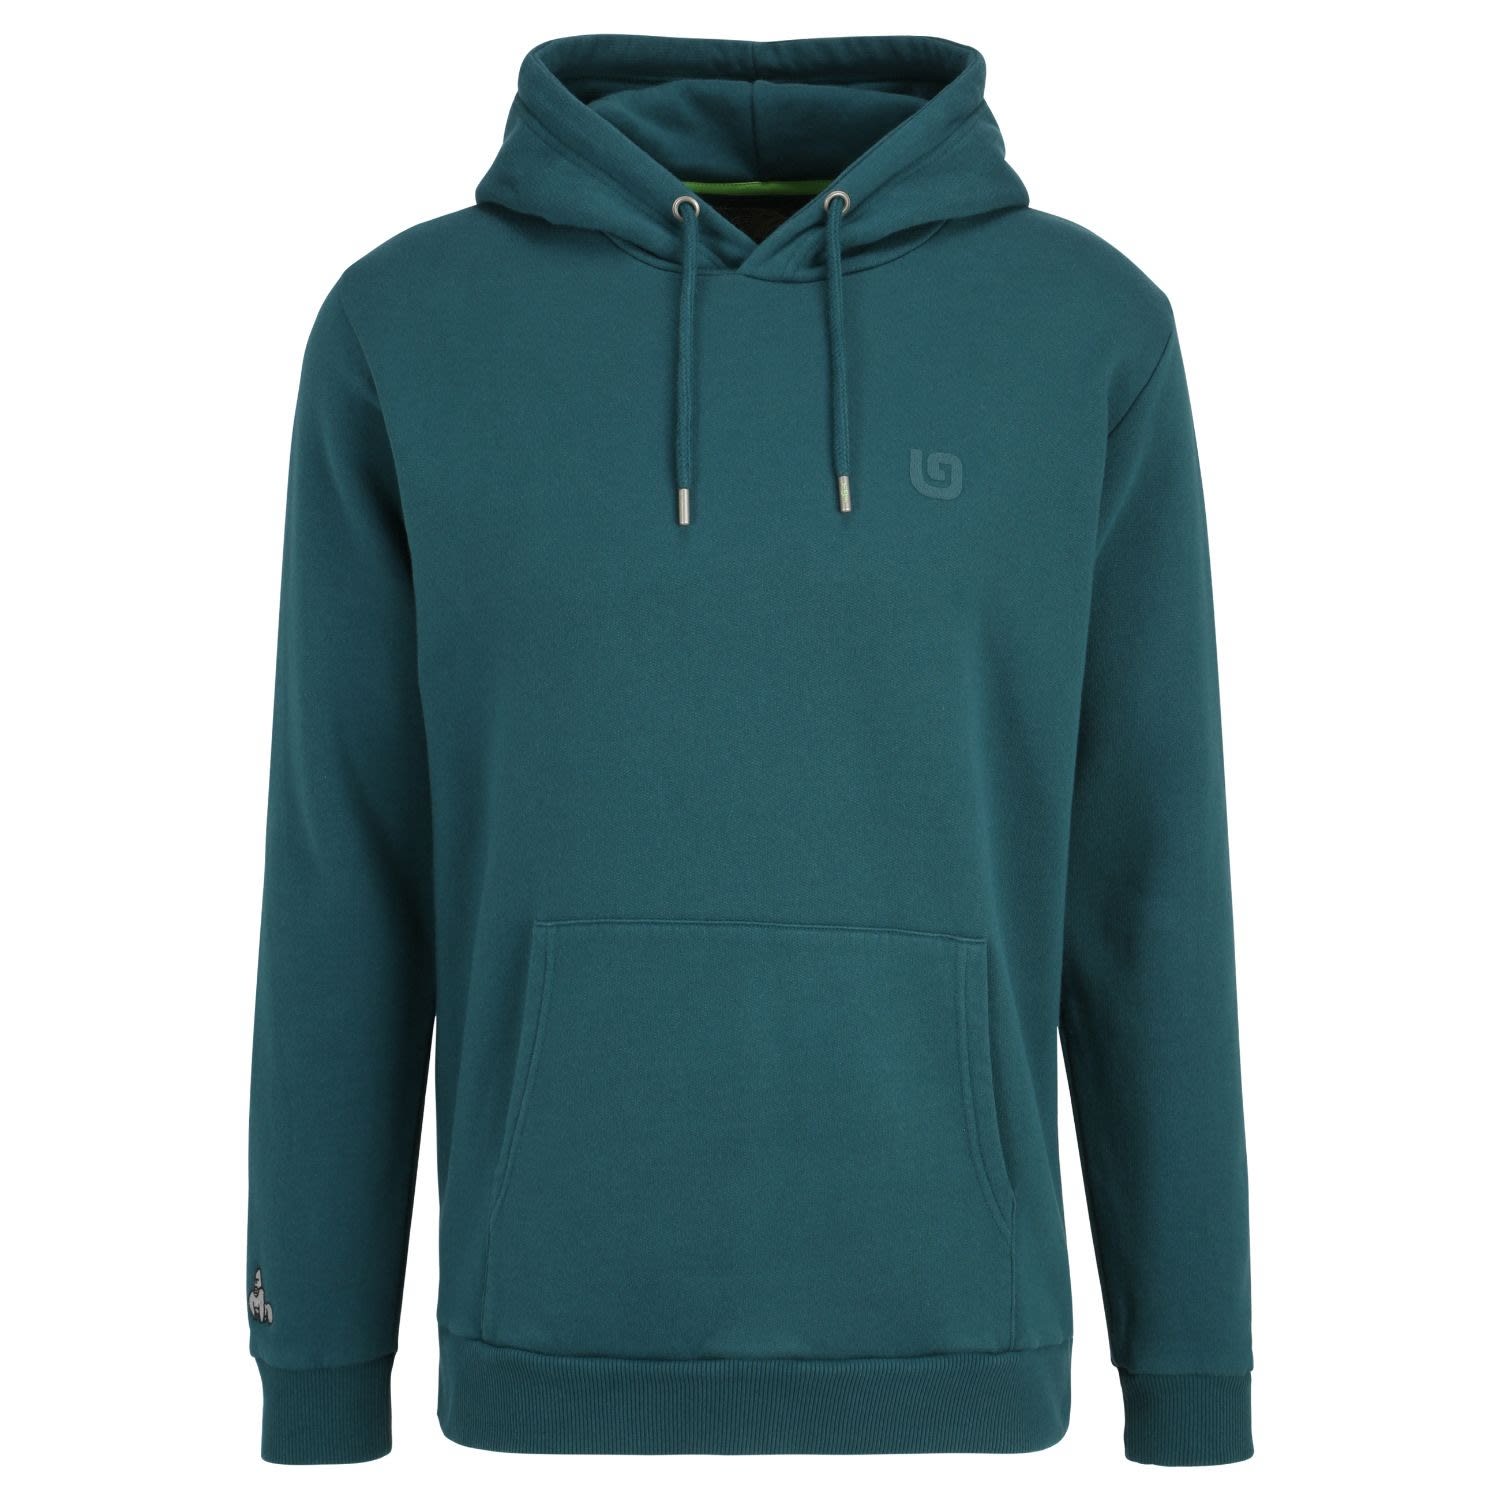 Maji Women’s ’G’ Collection Hoody - Green Extra Small That Gorilla Brand